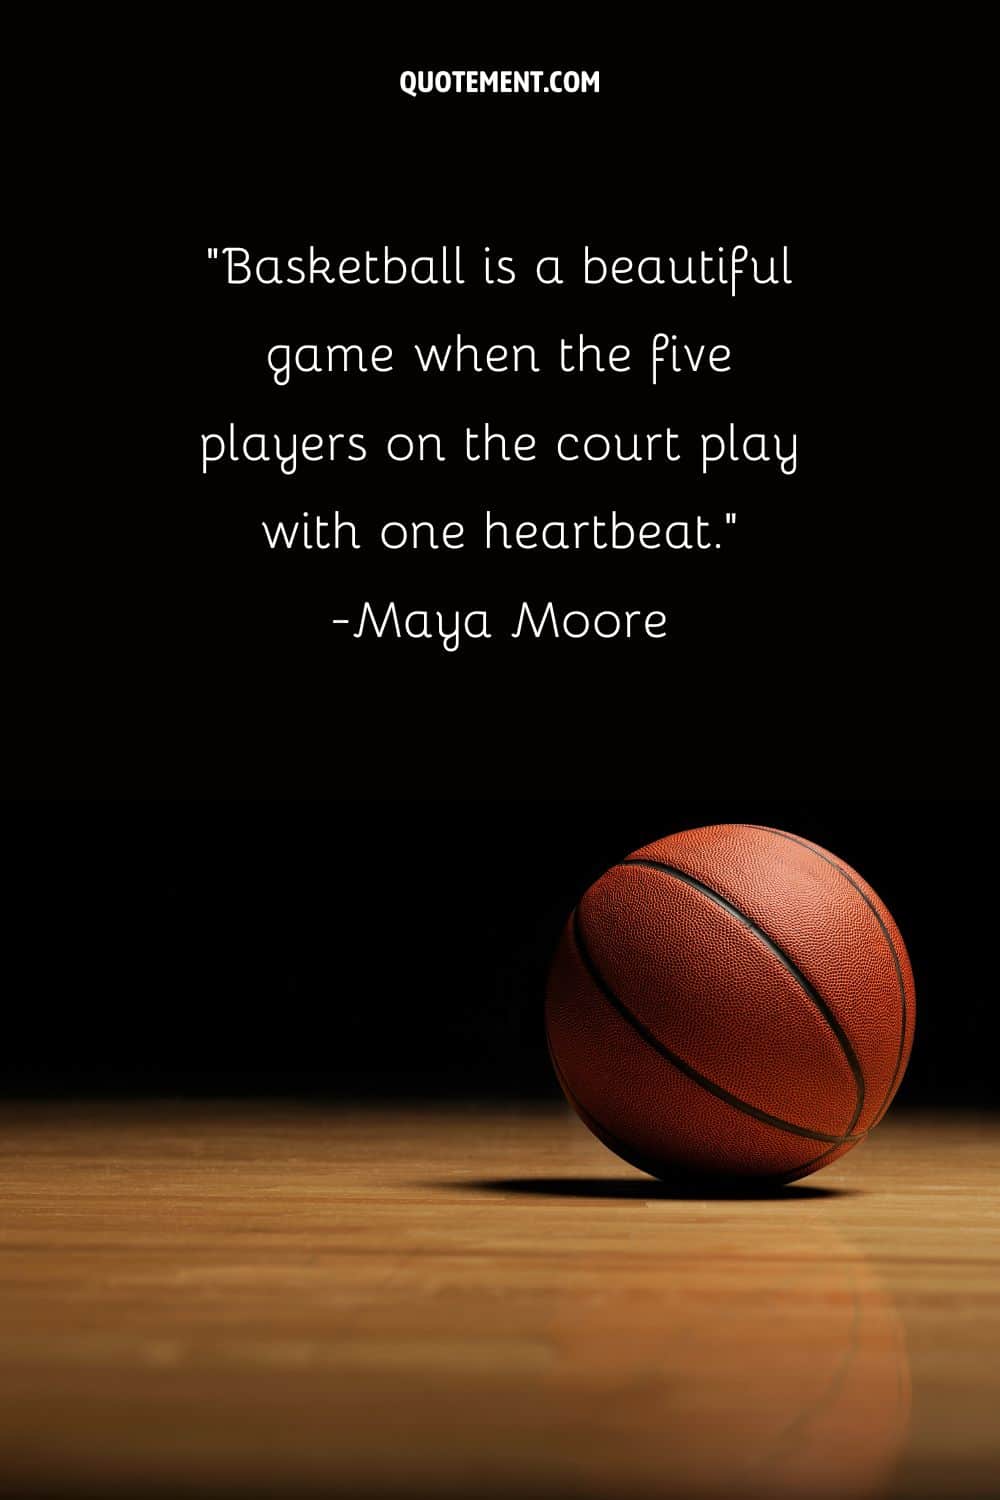 image of a ball representing basketball quote